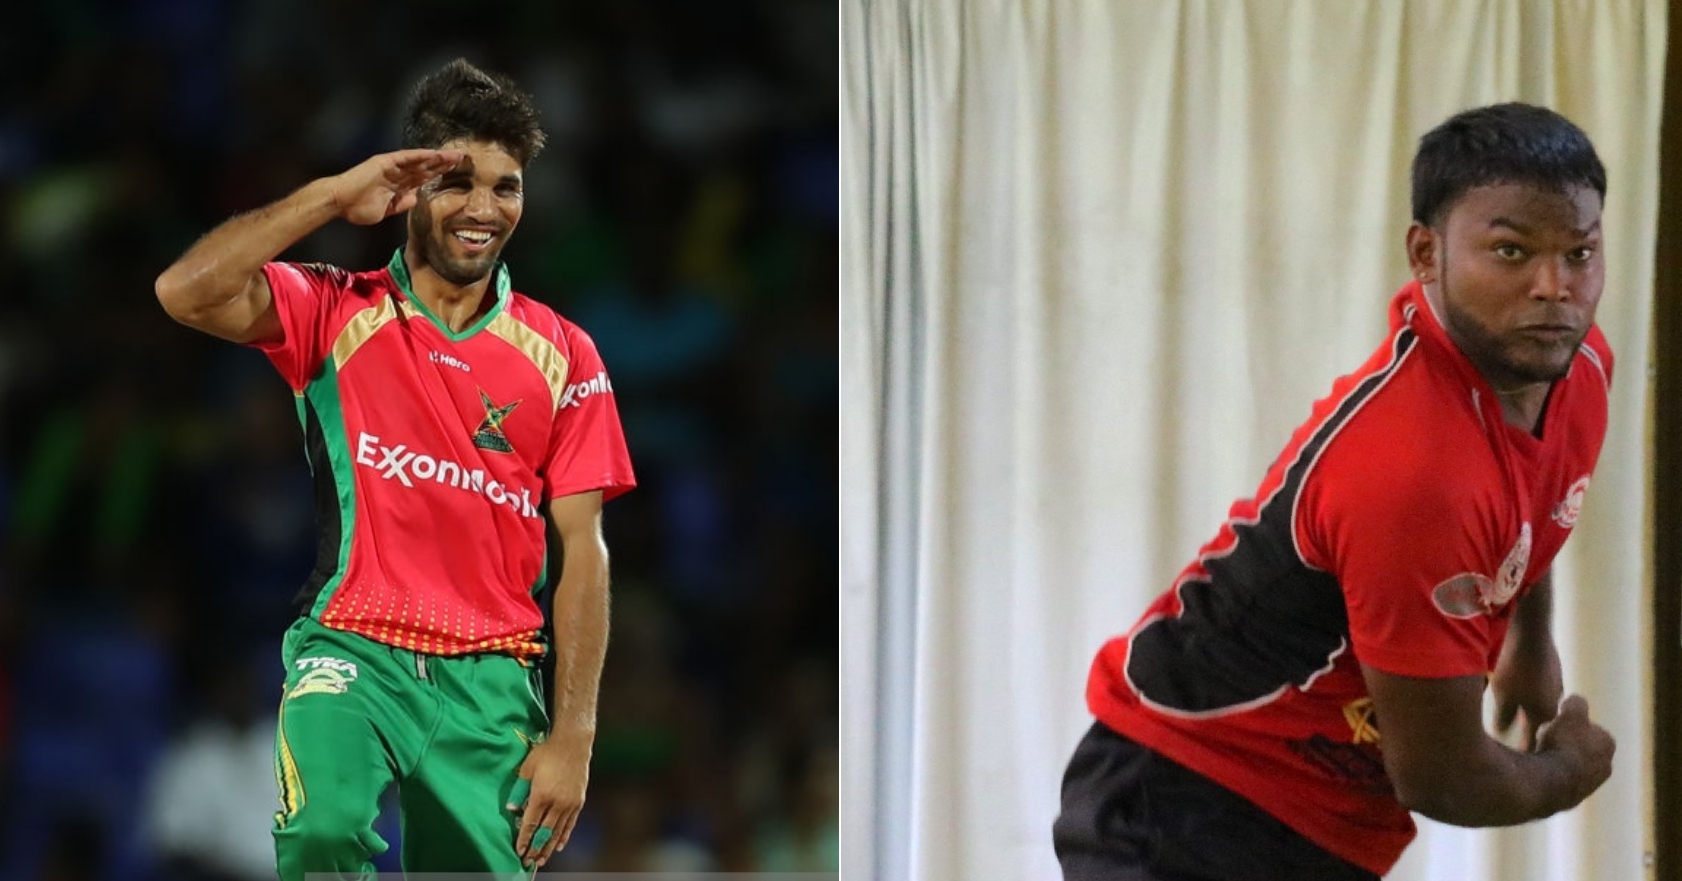 BREAKING: T&T leggie Magram replaces Qais Ahmed in GAW squad